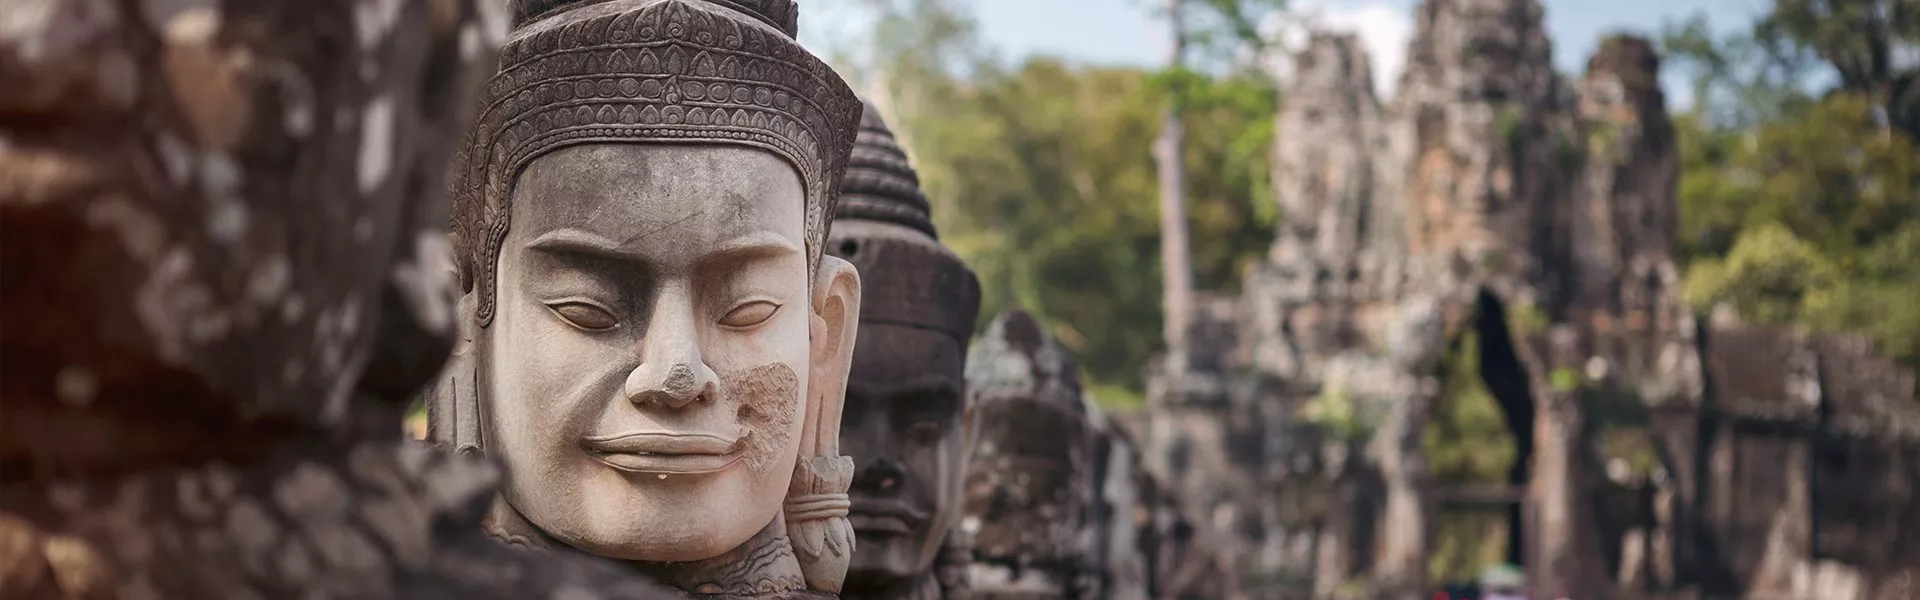 A row of buddha statues in Angkor Wat